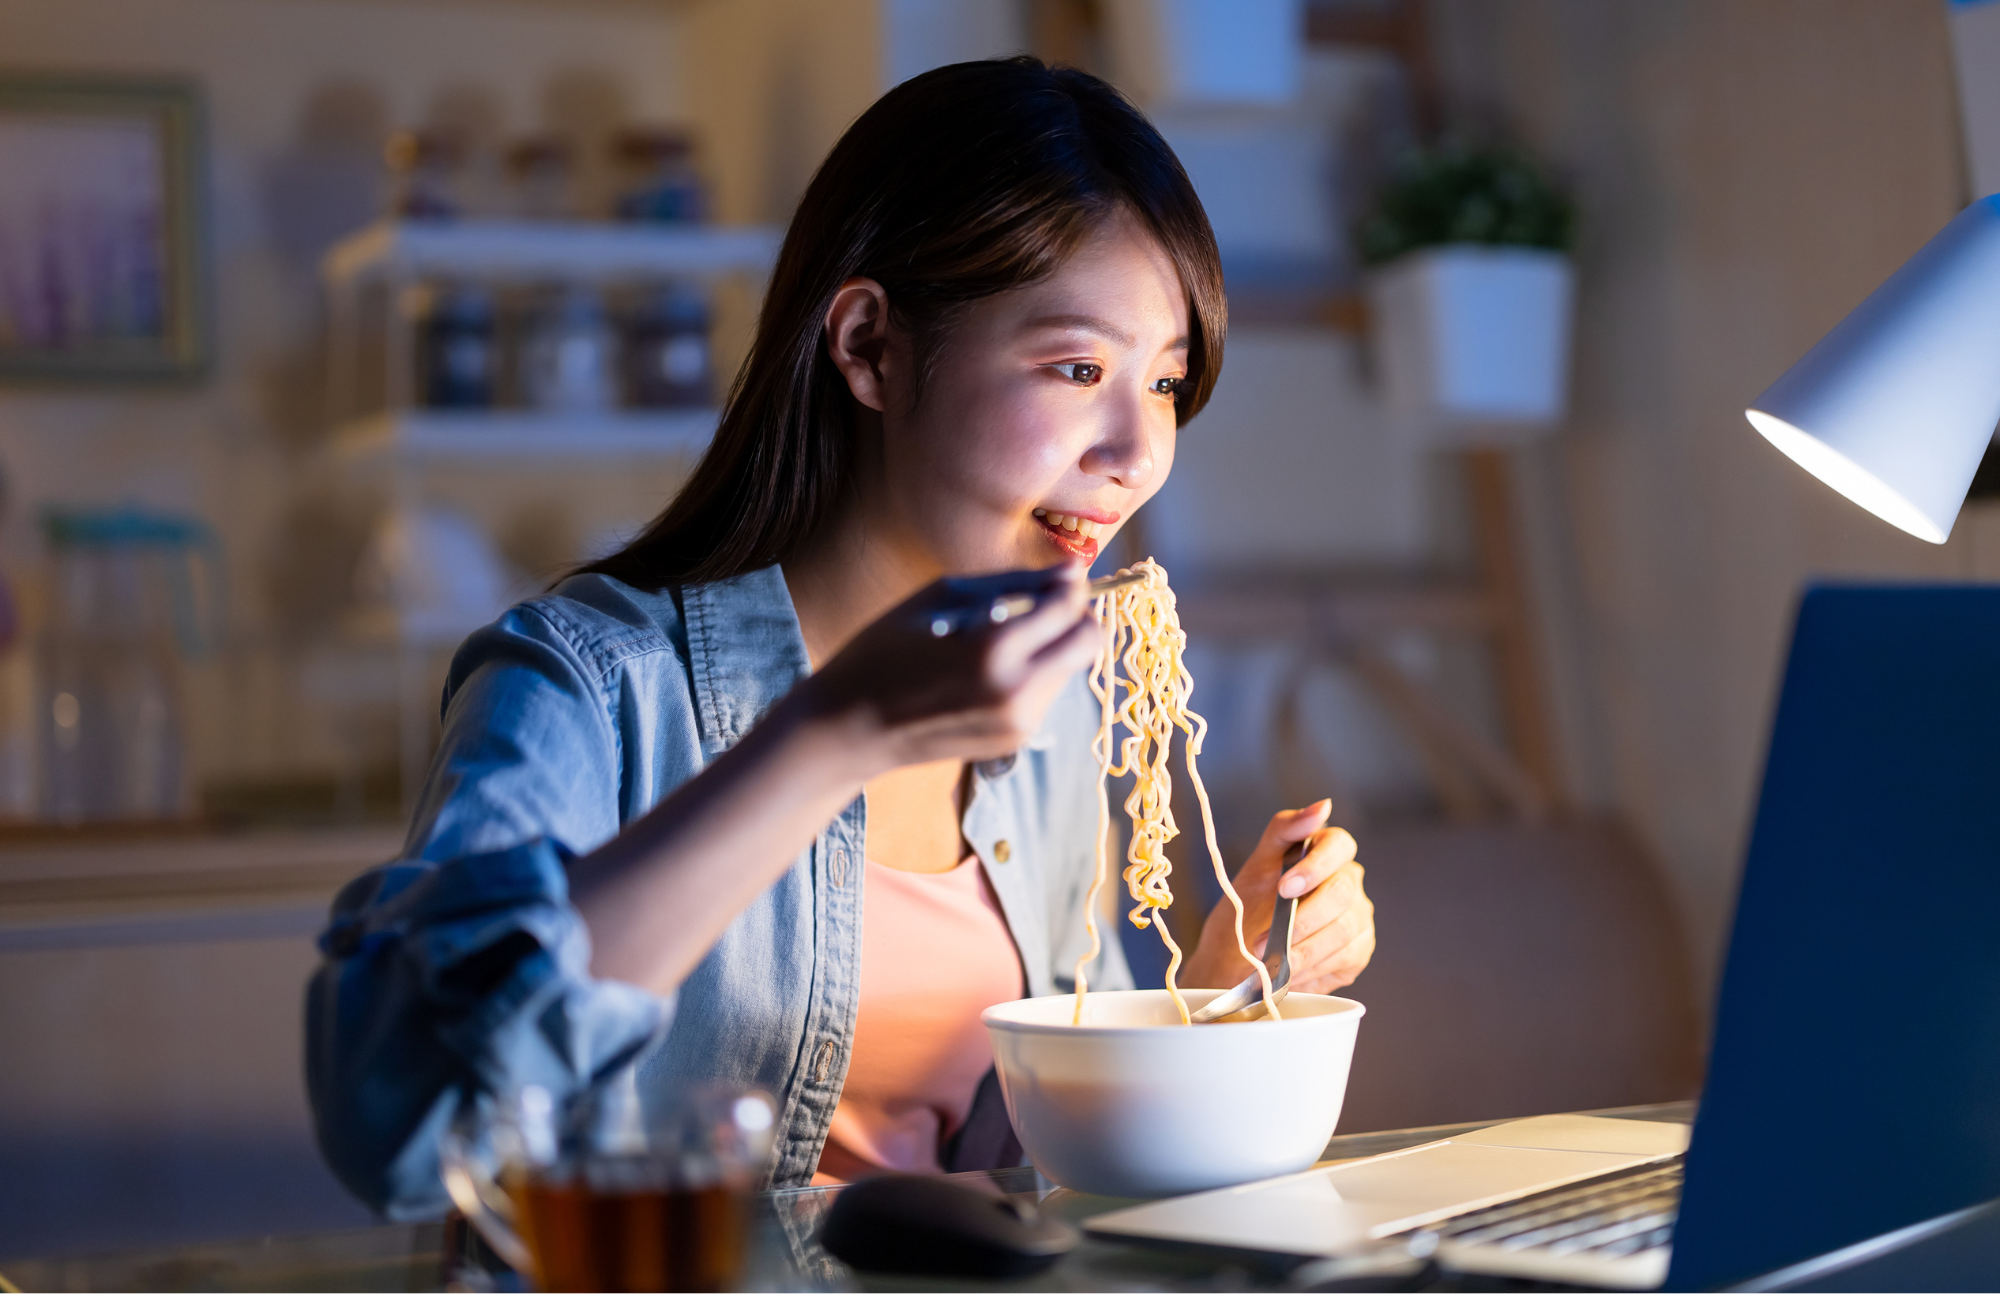 person at computer eating noodles